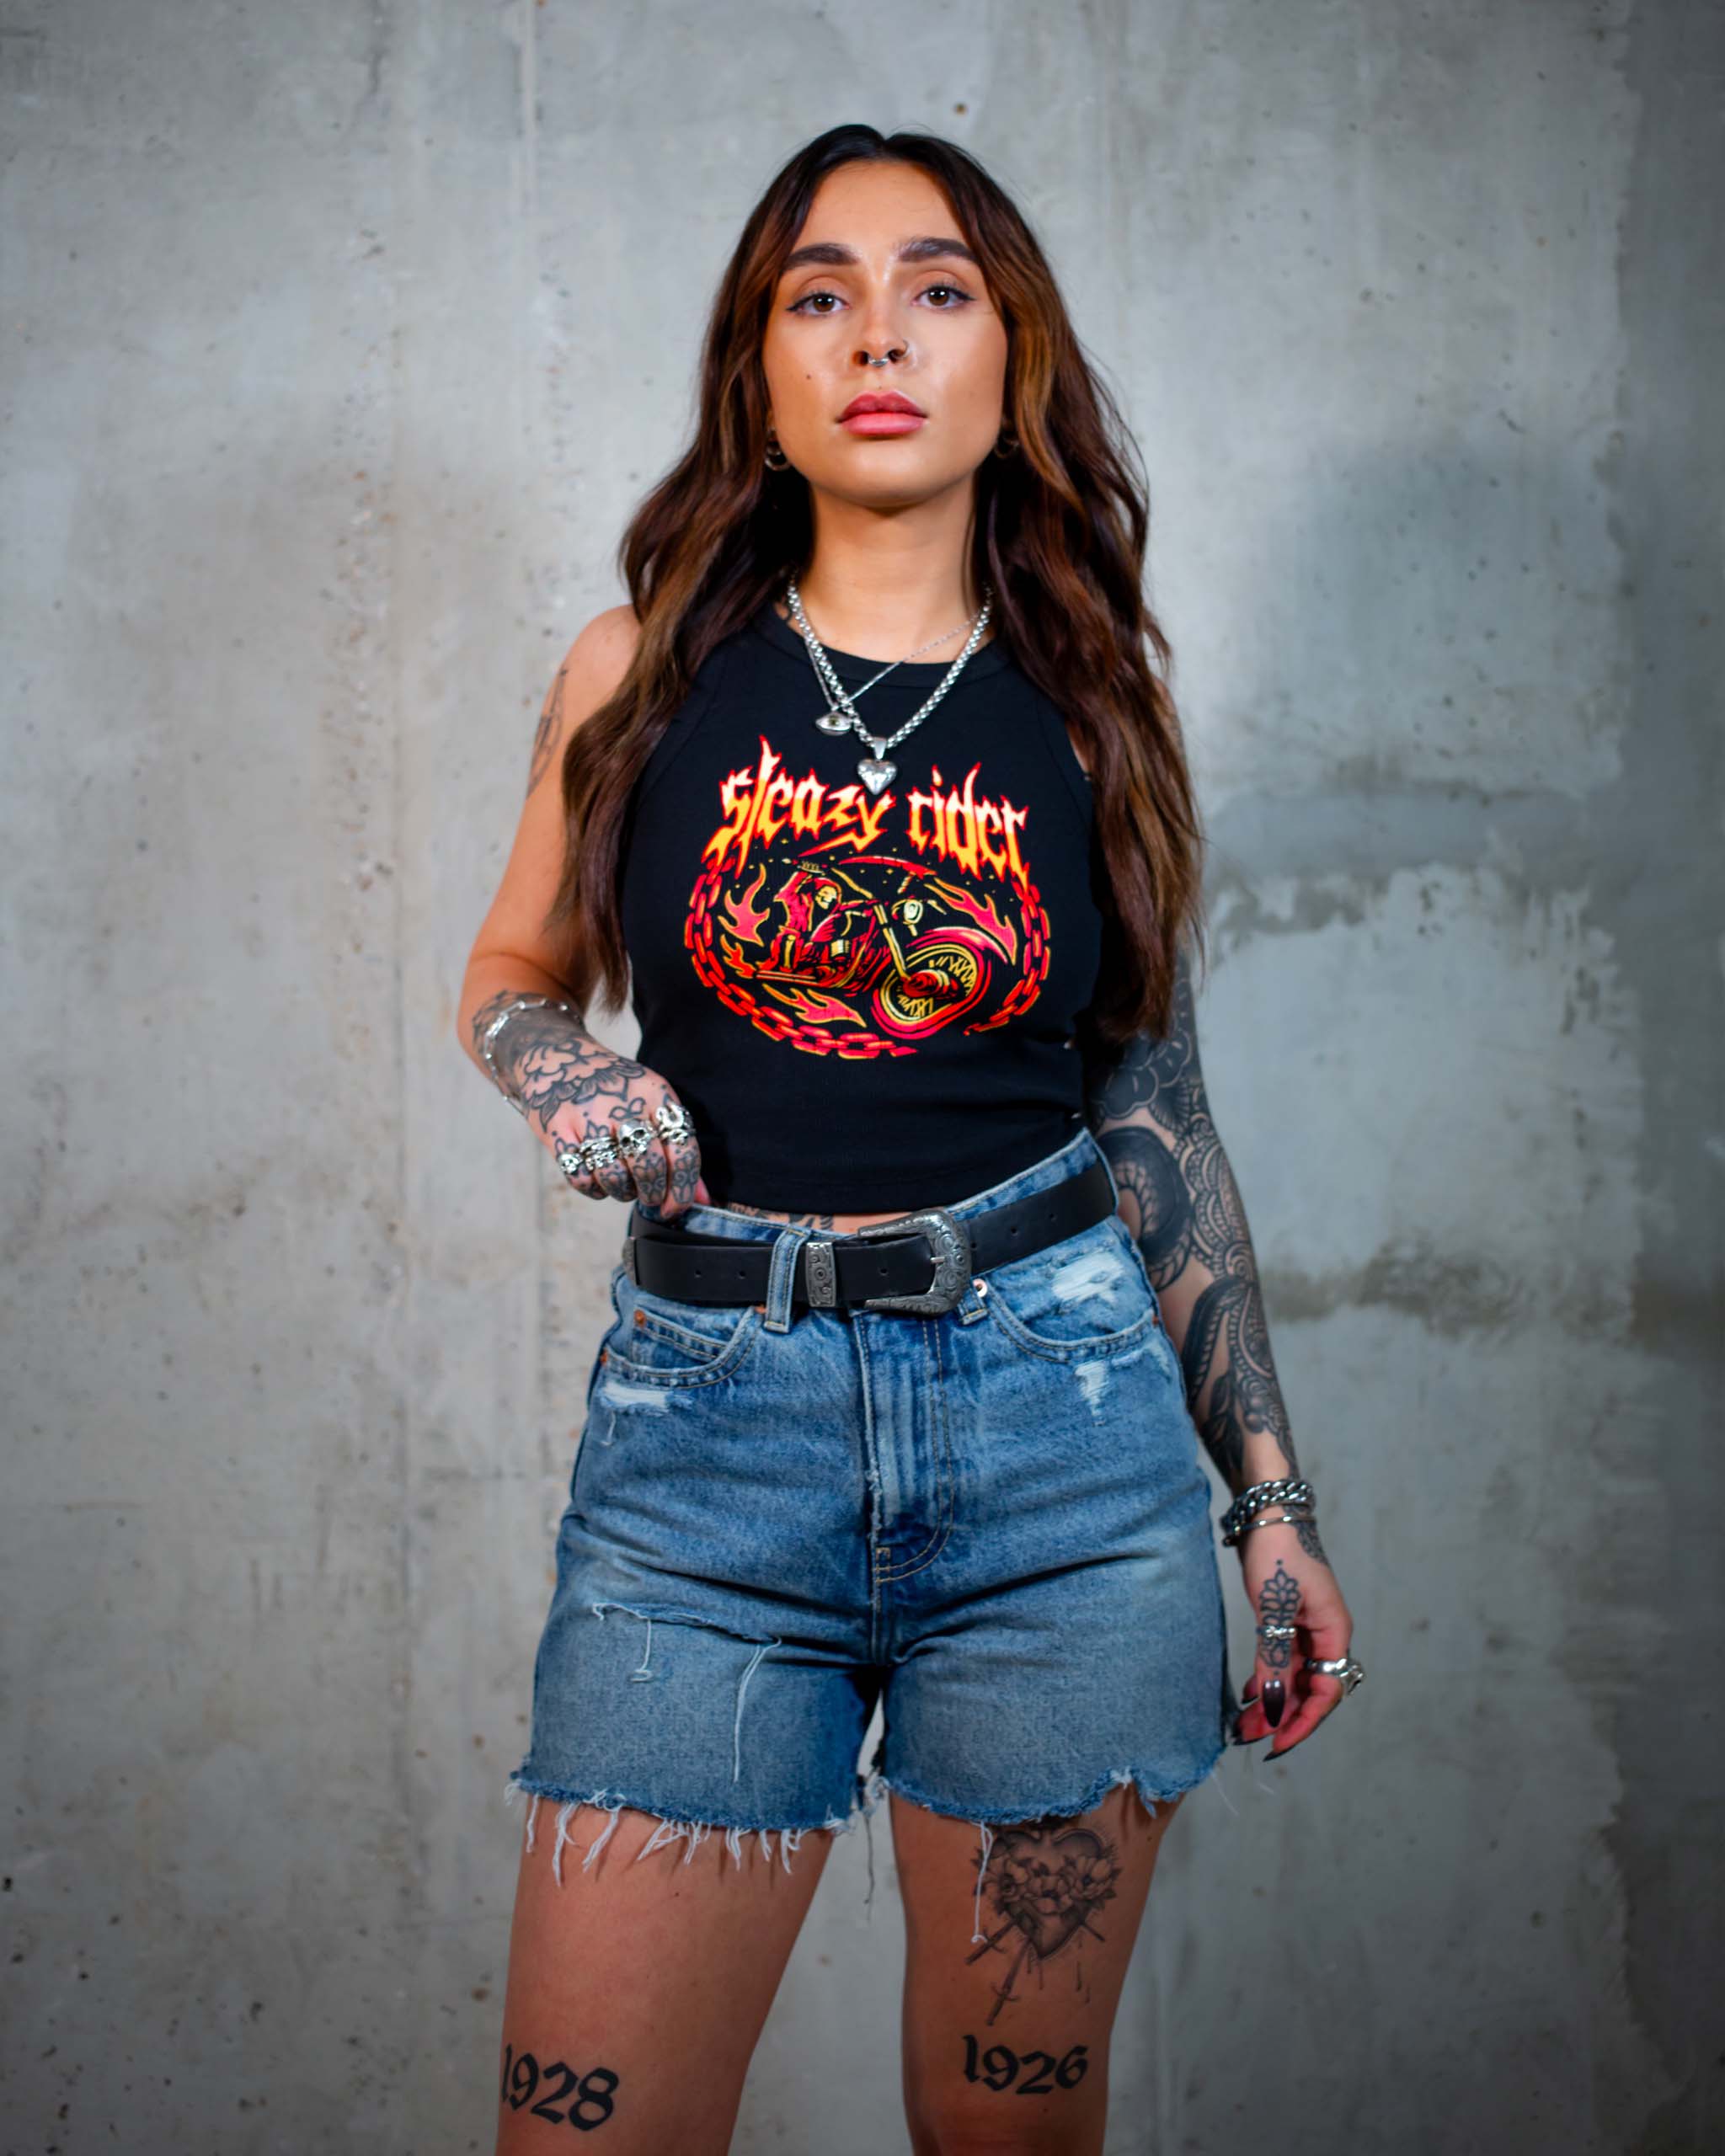 The Flaming Reaper tank top by Sleazy Rider, featuring the grim reaper on a Harley Davidson motorbike.